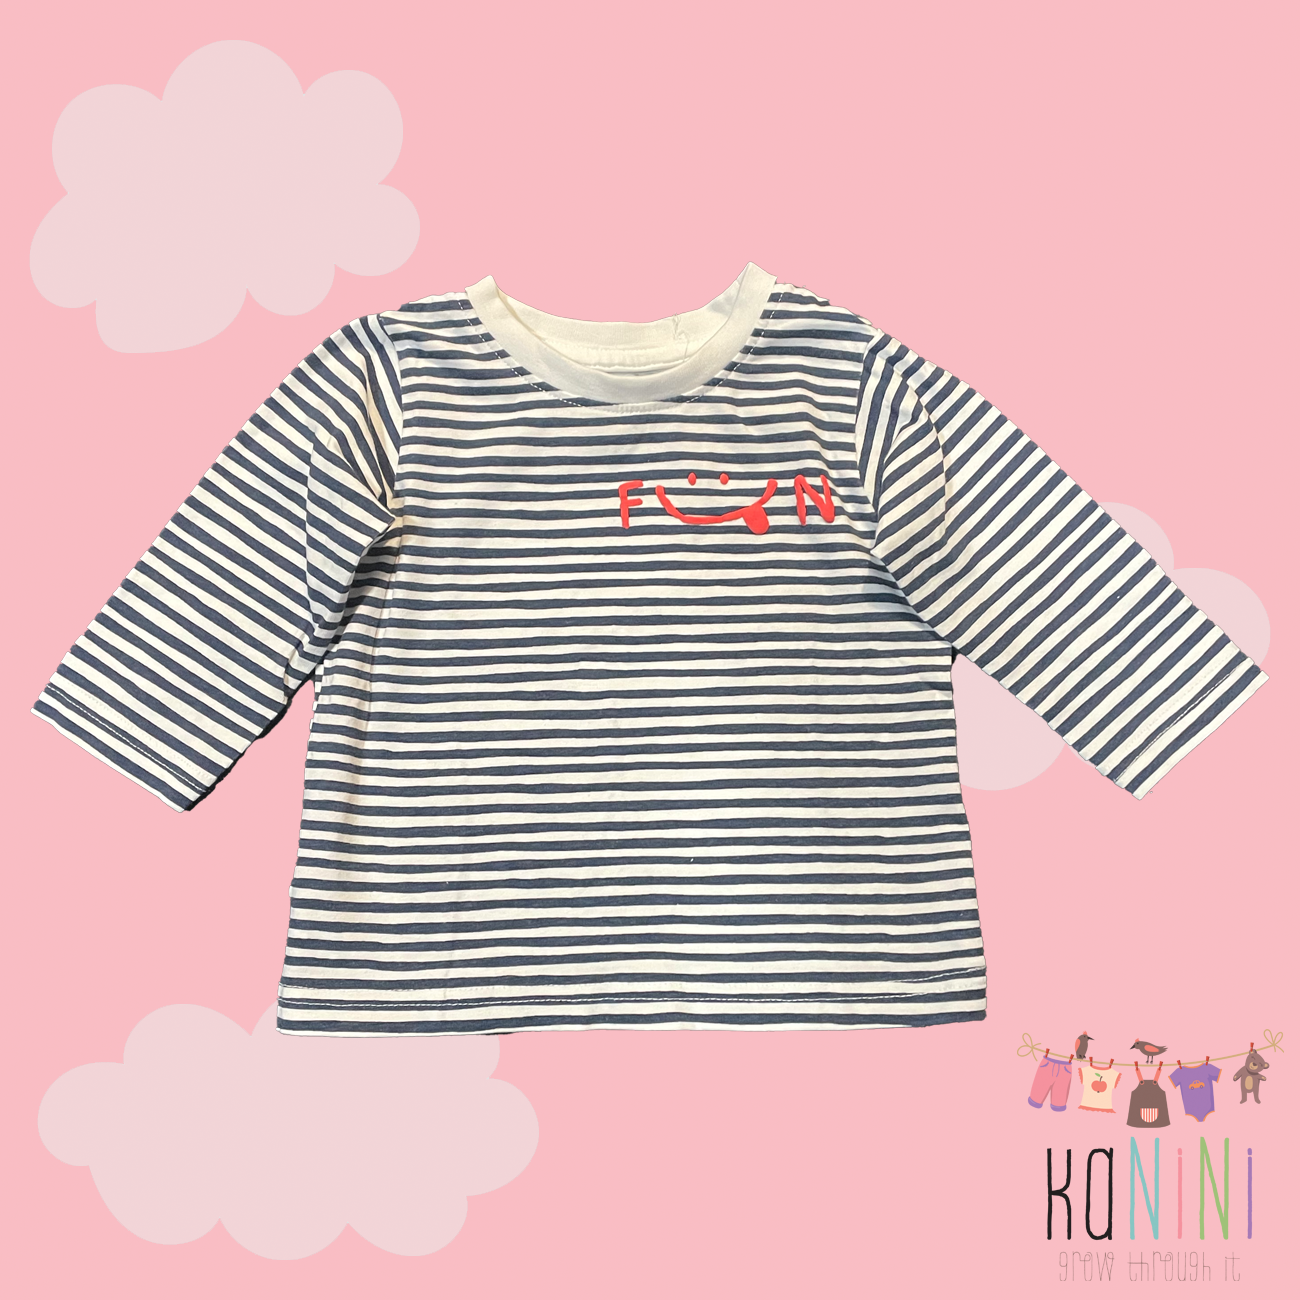 Featured image for “Woolworths 3 - 6 Months Girls Navy Stripe FUN t-Shirt”